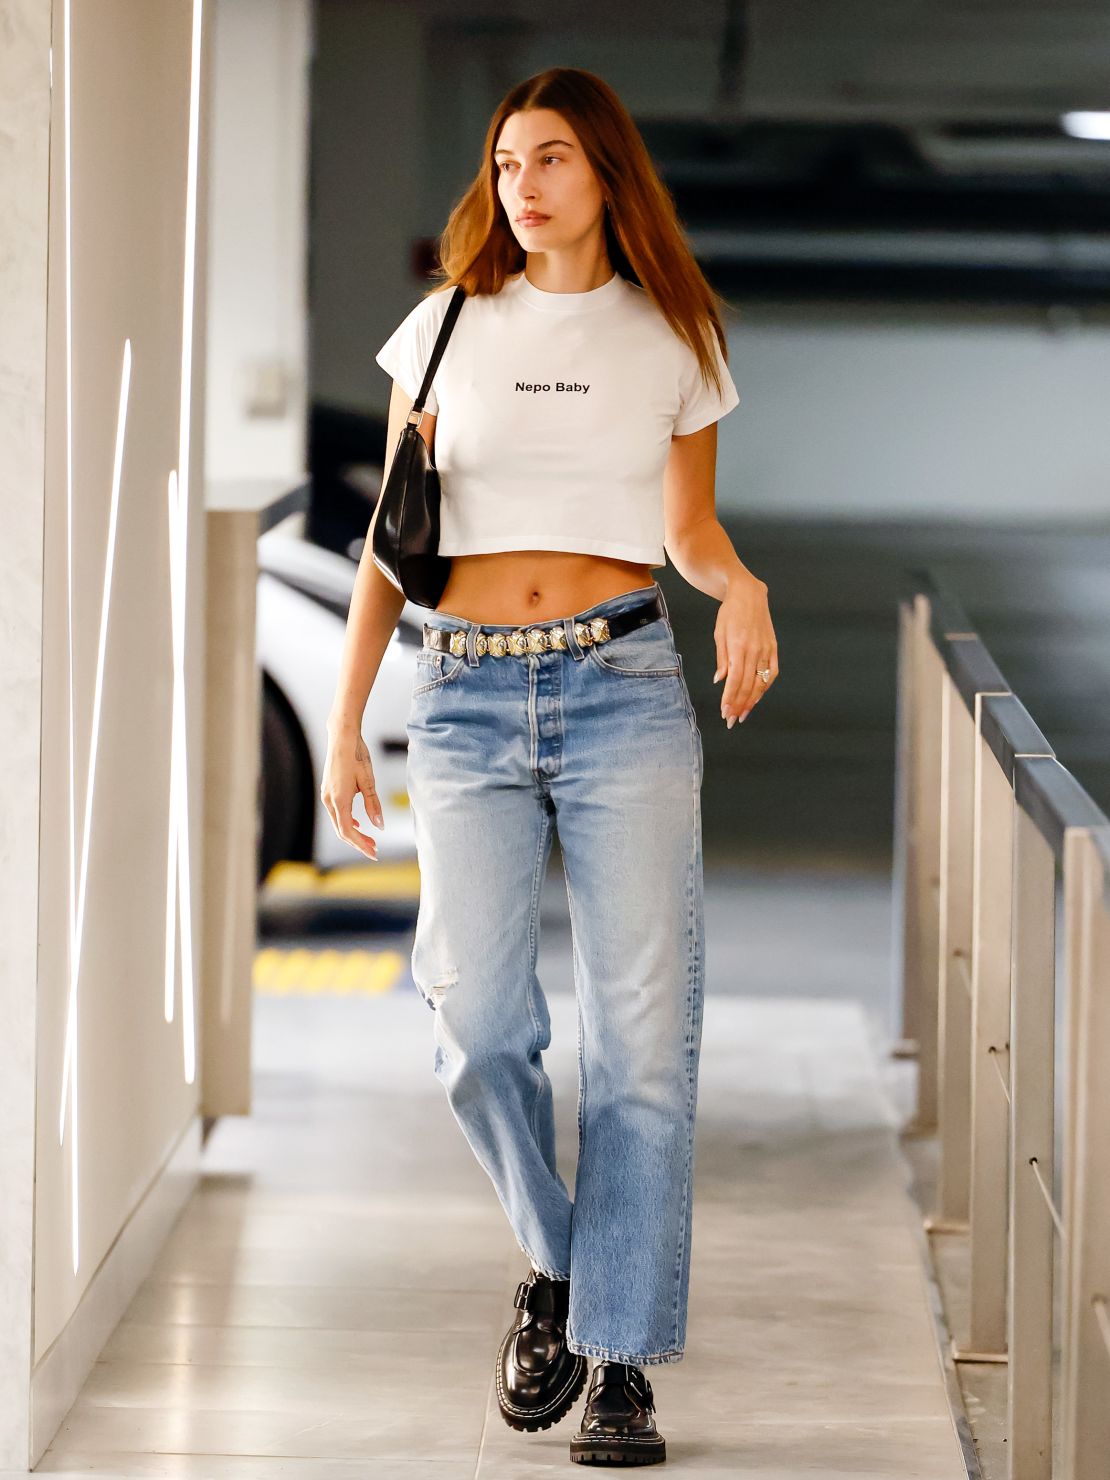 Hailey Bieber spotted in a "nepo baby" crop top in LA. 